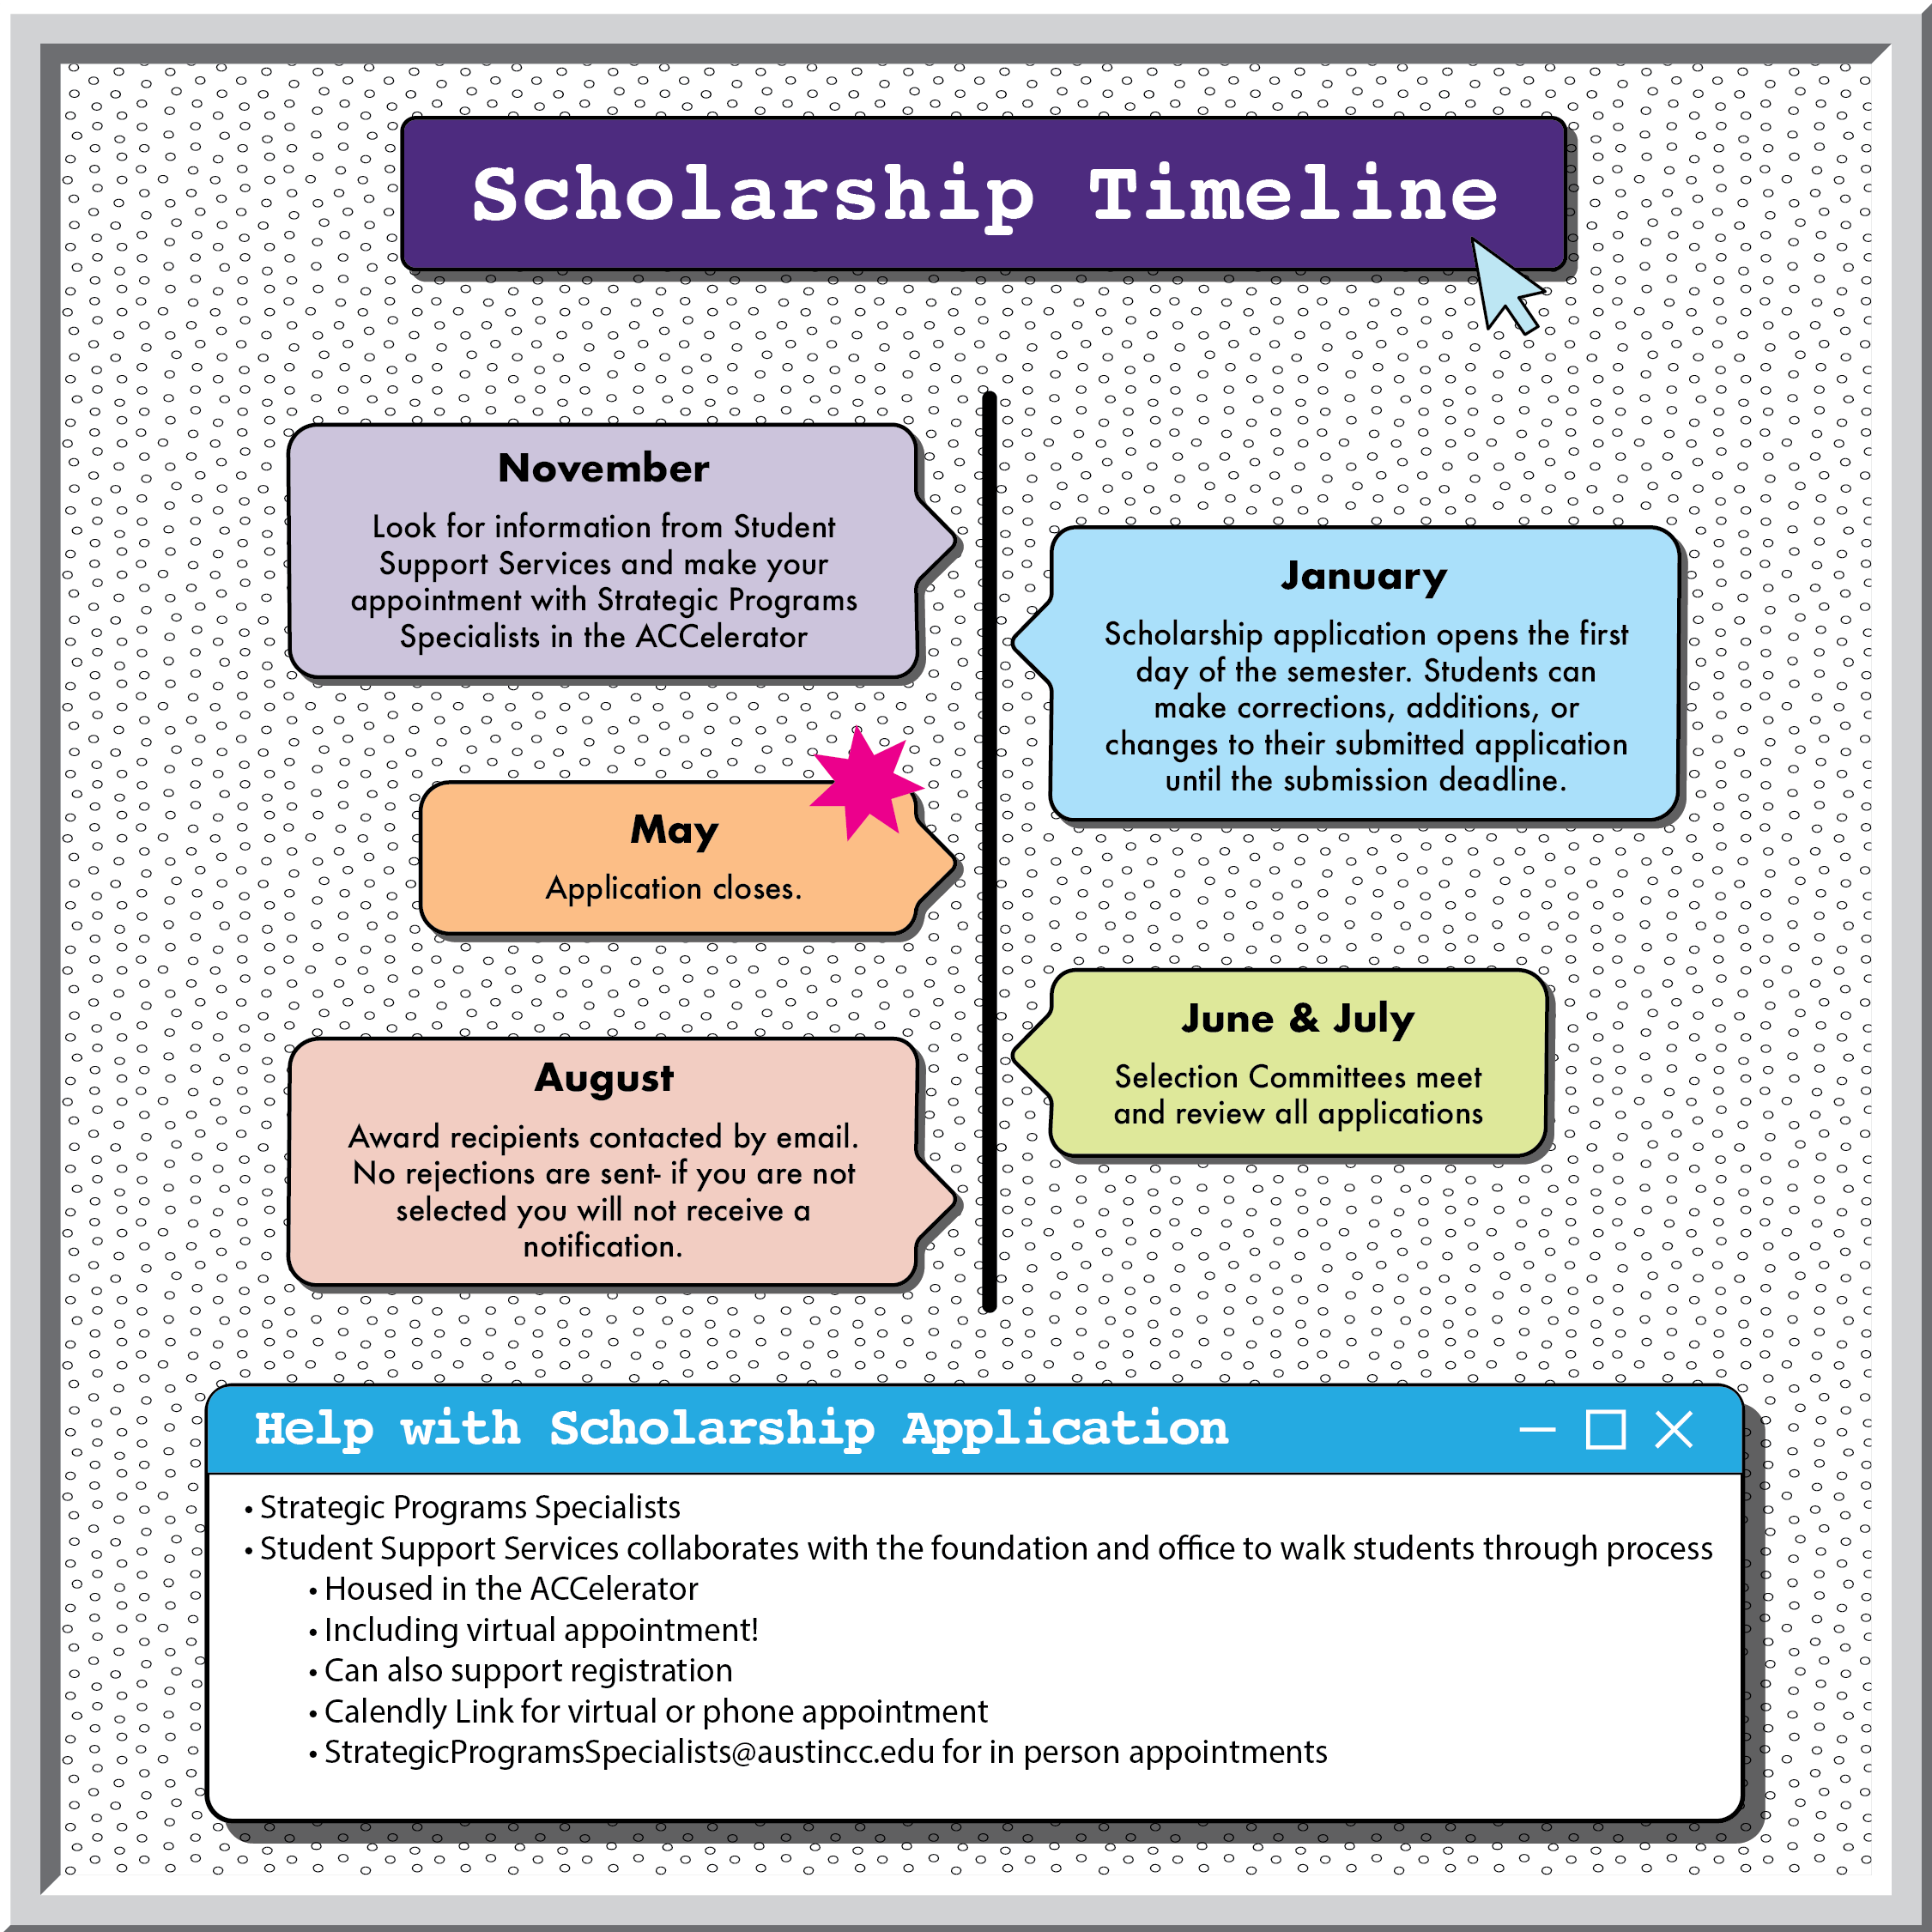 Scholarship Timeline
November - Look for information from Student support Services and make your appointment with Strategic Programs Specialists in the ACCelerator

January - Scholarship application opens the first day of the semester

May - Application closes

June and July - Selection Committees meet and reviea all applications

August - Award recipients contacted by email. No rejection emails are sent. 

Find help with this process at the ACCelerator by talking to Student Support Services